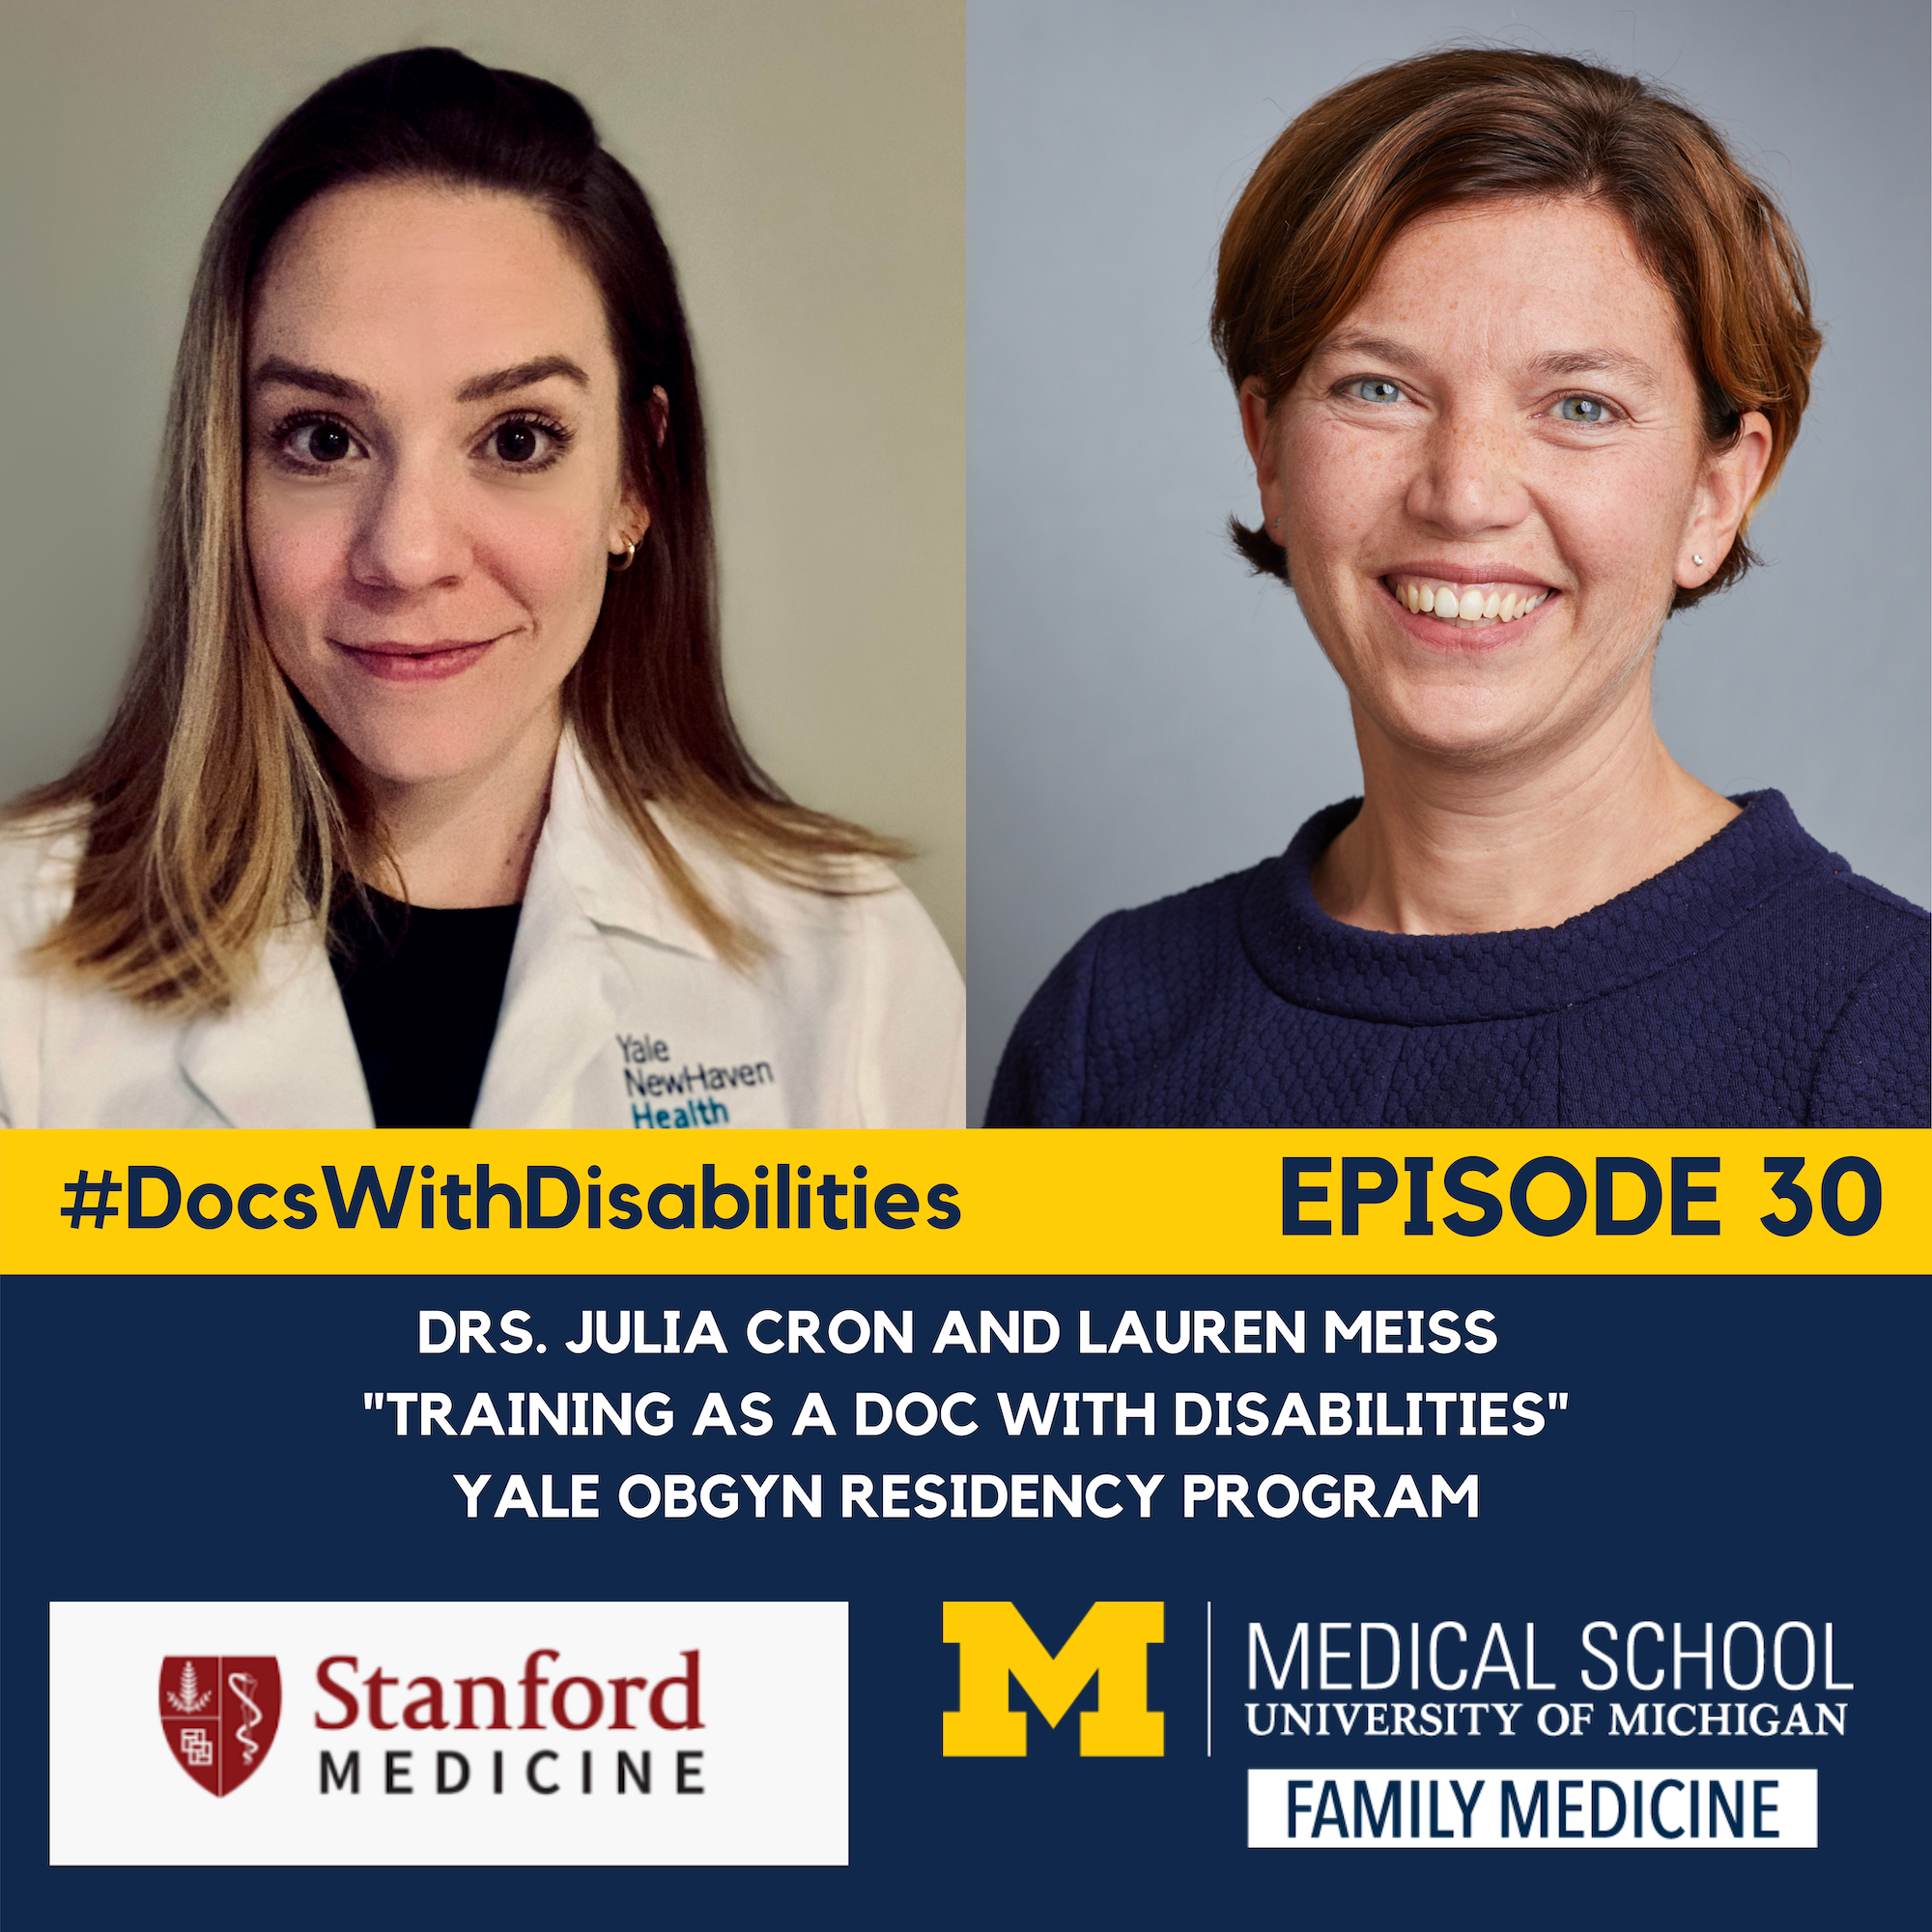 #Docs With Disabilities podcast episode 30 Drs. Julia Cron and Lauren Meiss "training as a Doc with disabilities" yale obgyn residency program, from stanford medicine and the university of michigan medical school department of family medicine